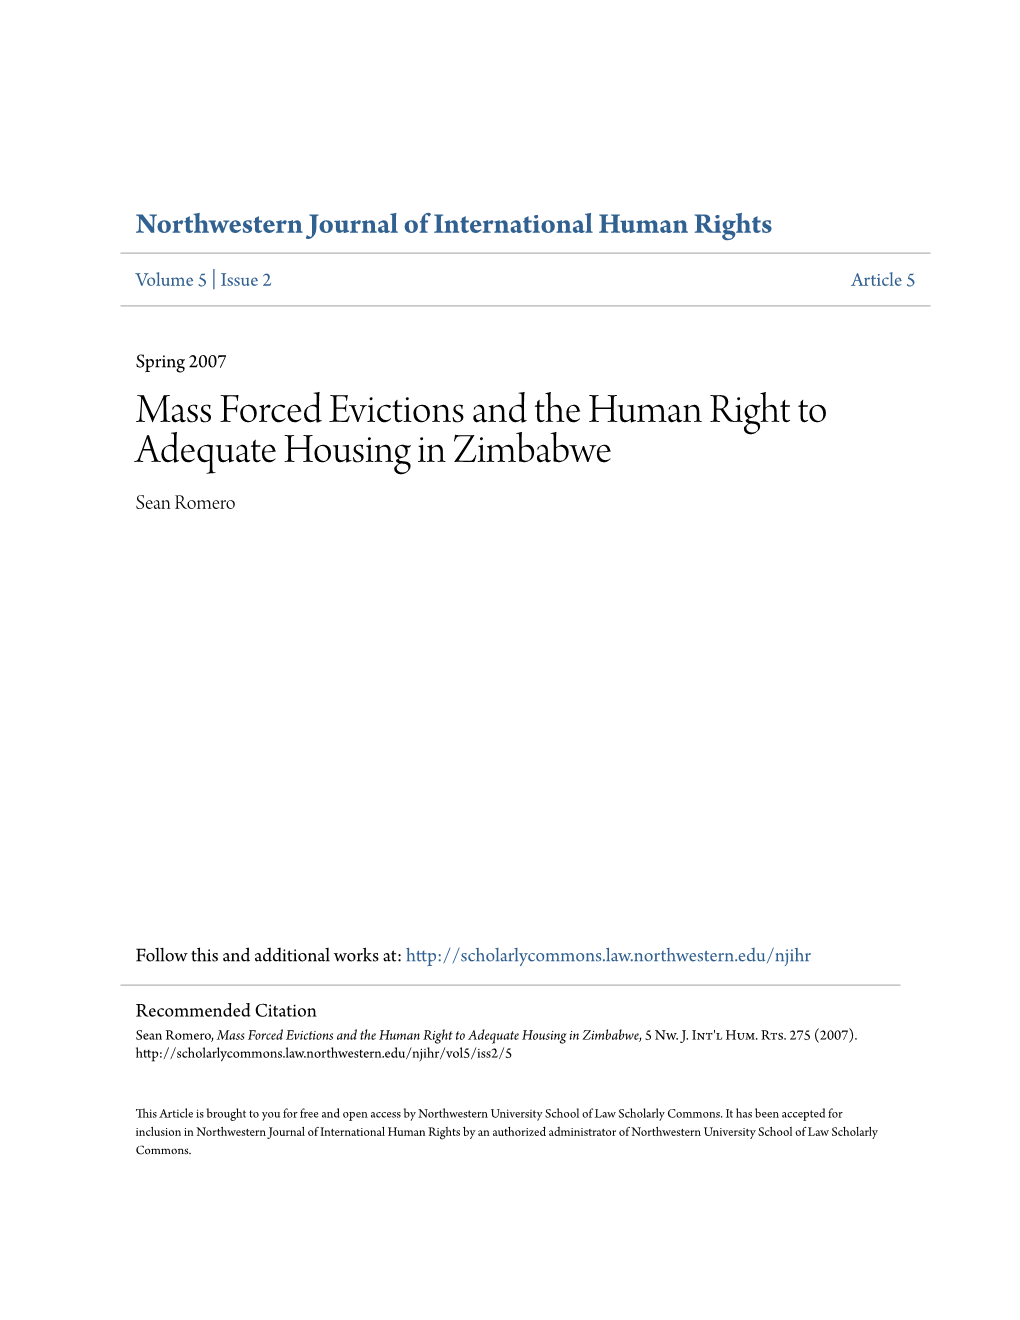 Massed Forced Evictions and the Human Right to Housing in Zimbabwe